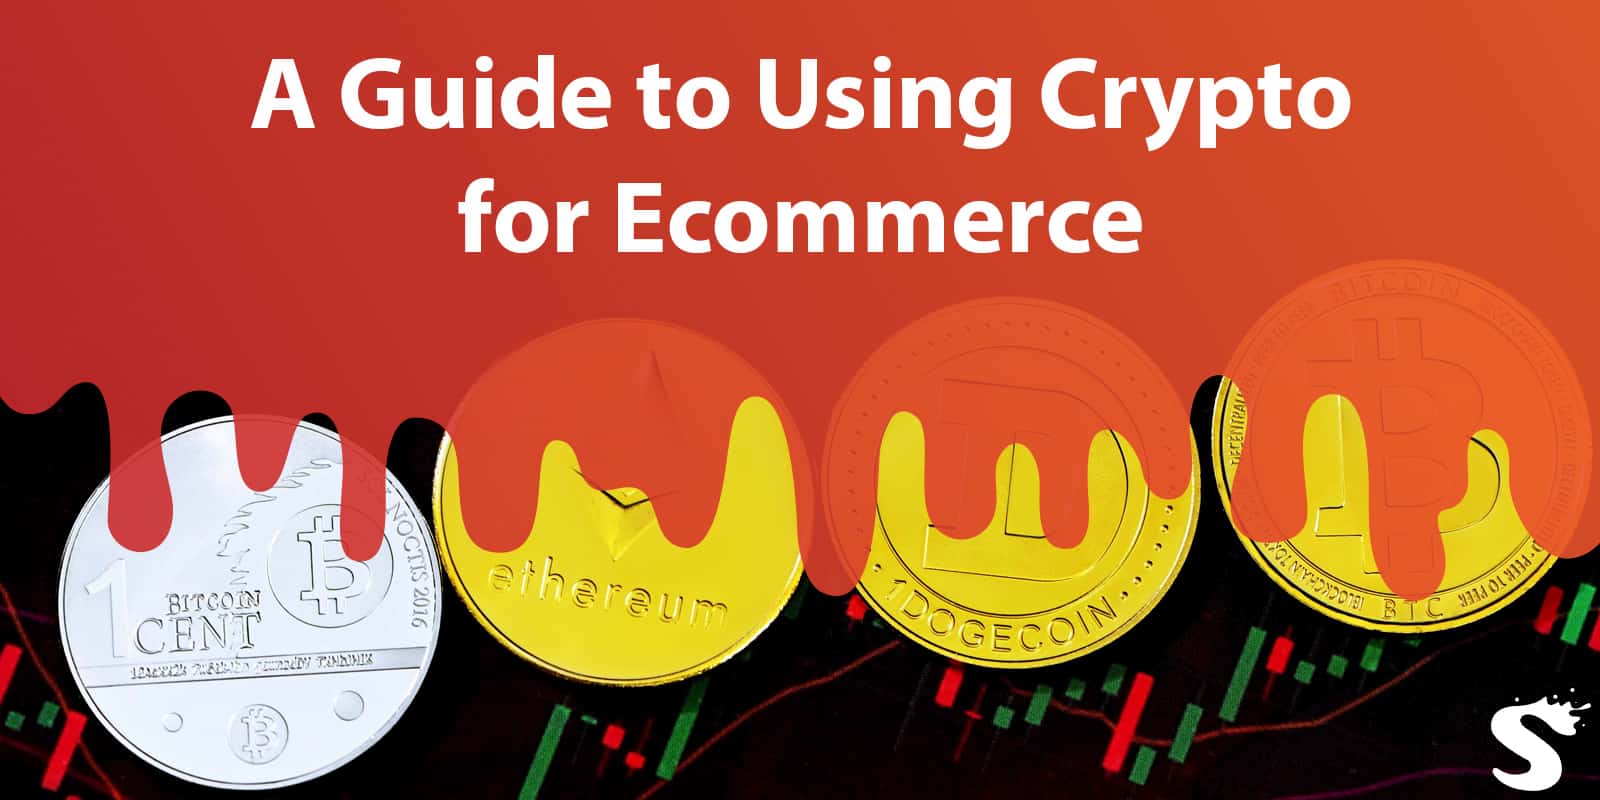 A Guide to Using Crypto for Ecommerce